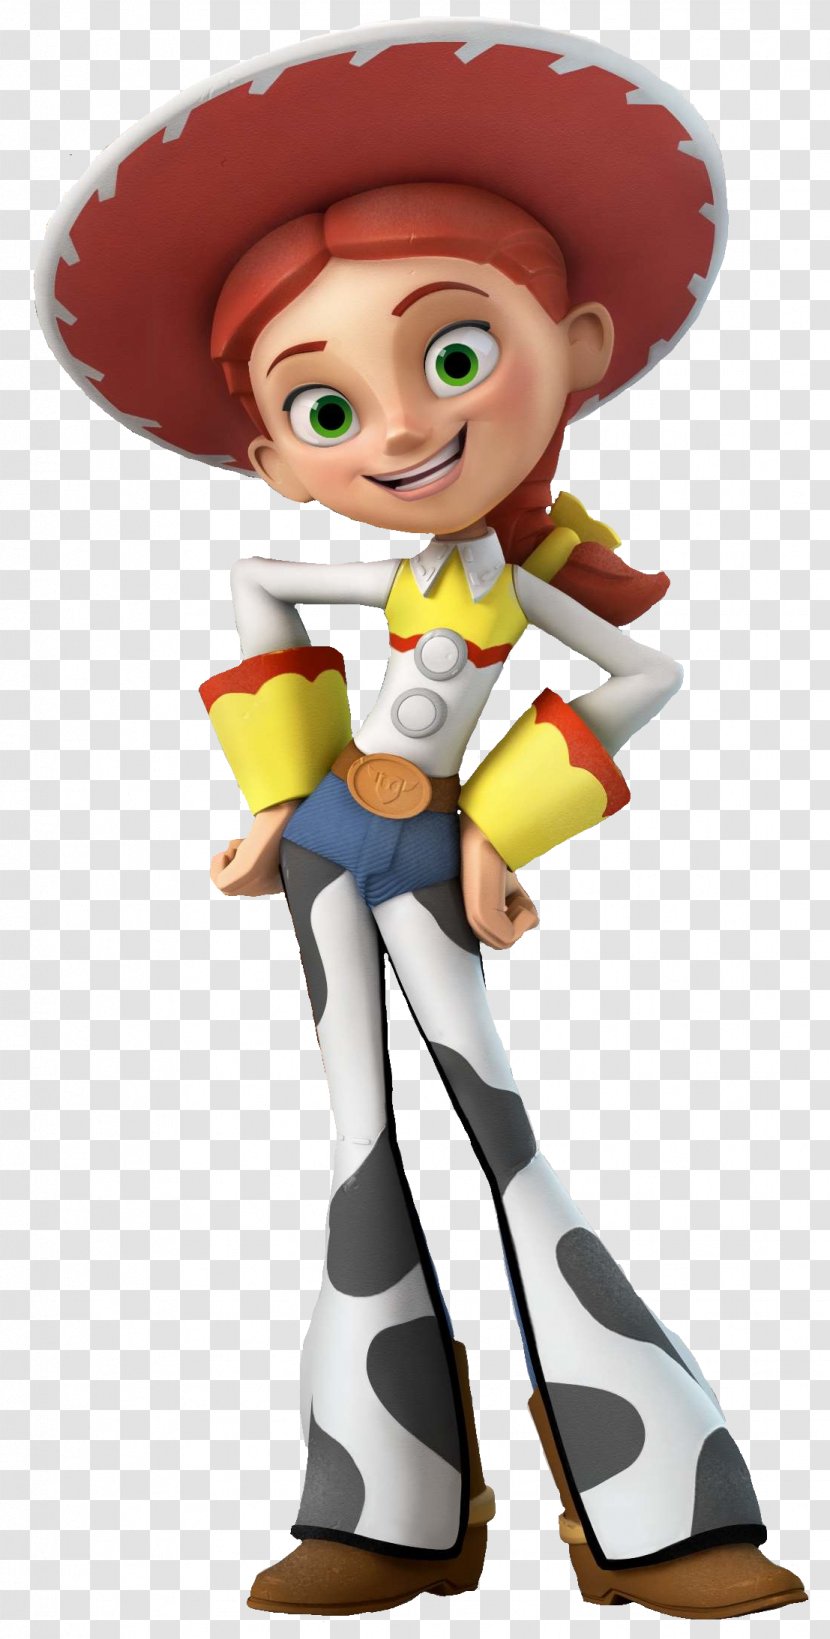 Toy Story 2: Buzz Lightyear To The Rescue Jessie Sheriff Woody - Character Transparent PNG